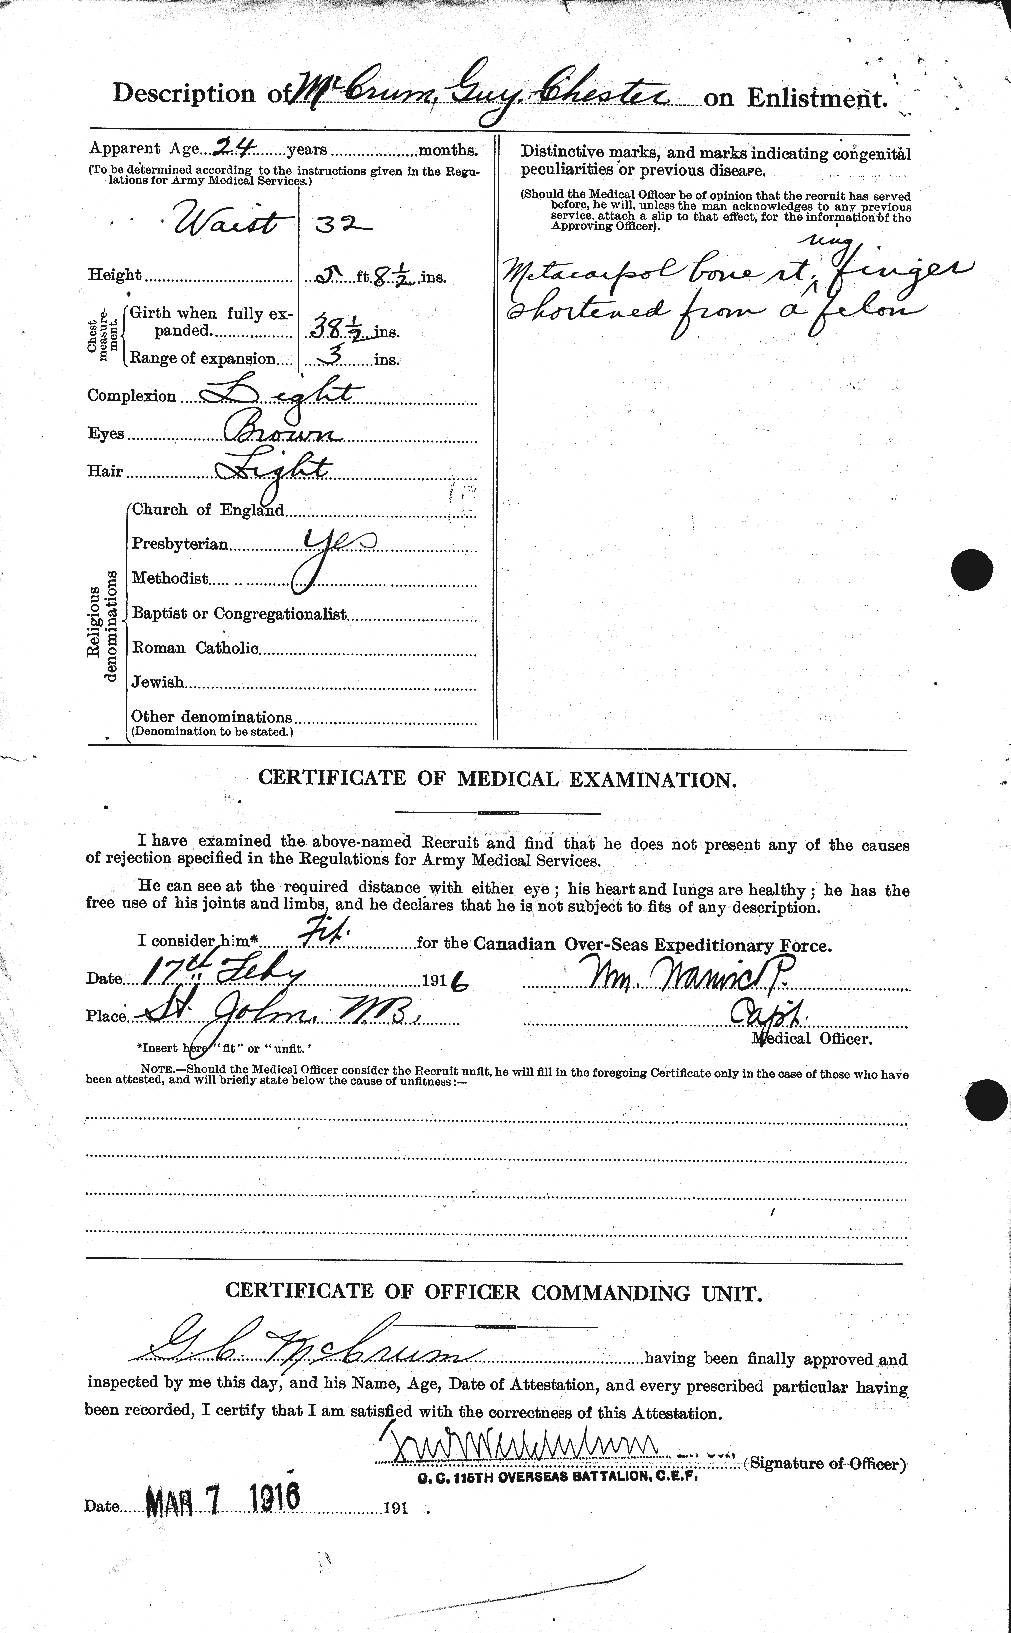 Personnel Records of the First World War - CEF 135742b